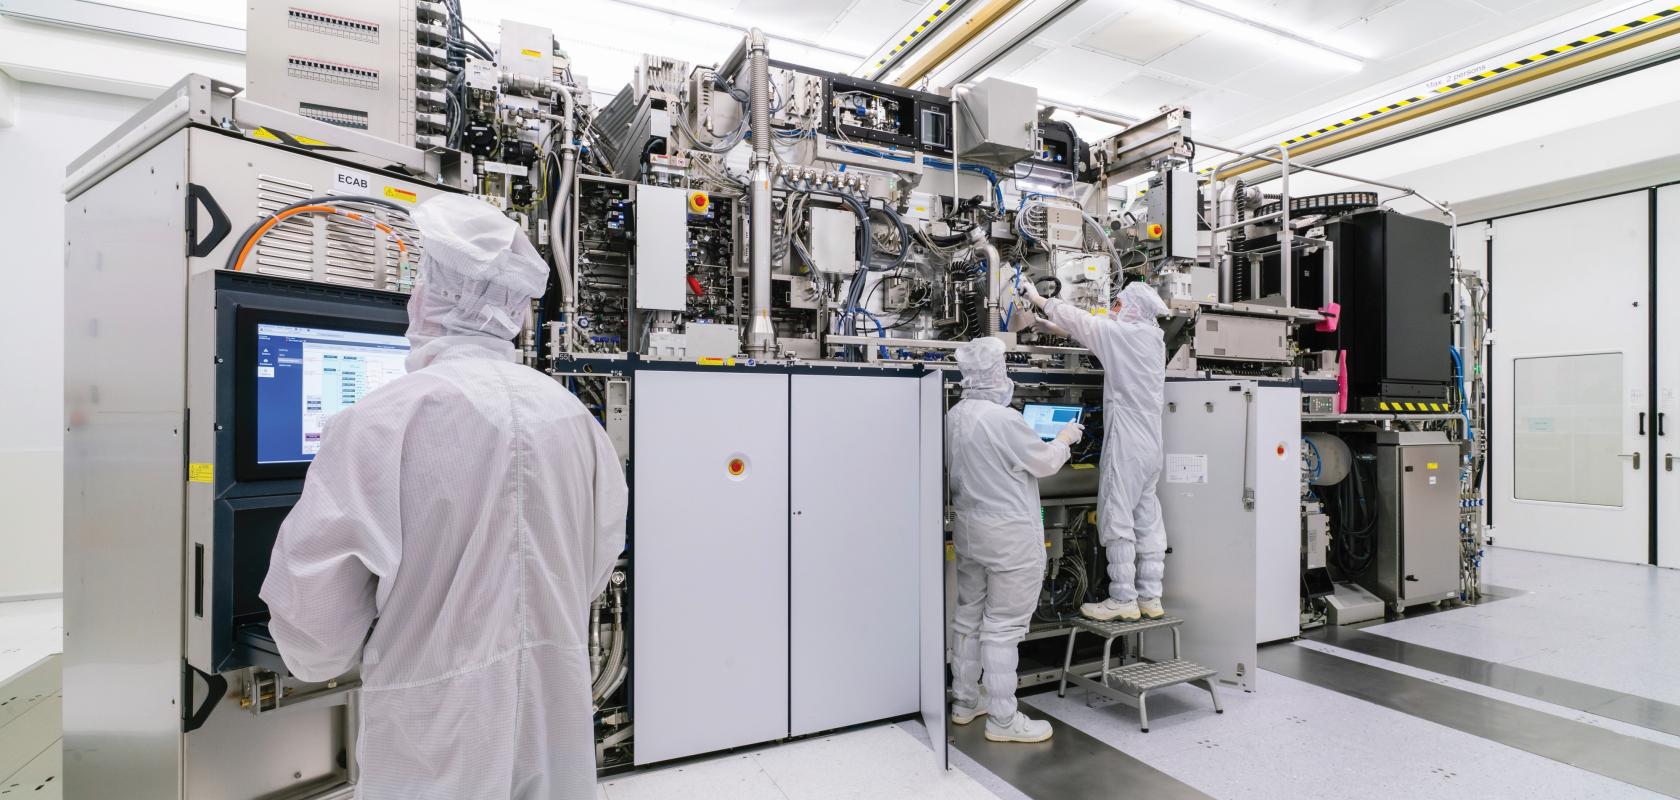 Since EUV light is absorbed by air particles, it must be operated in a cleanroom